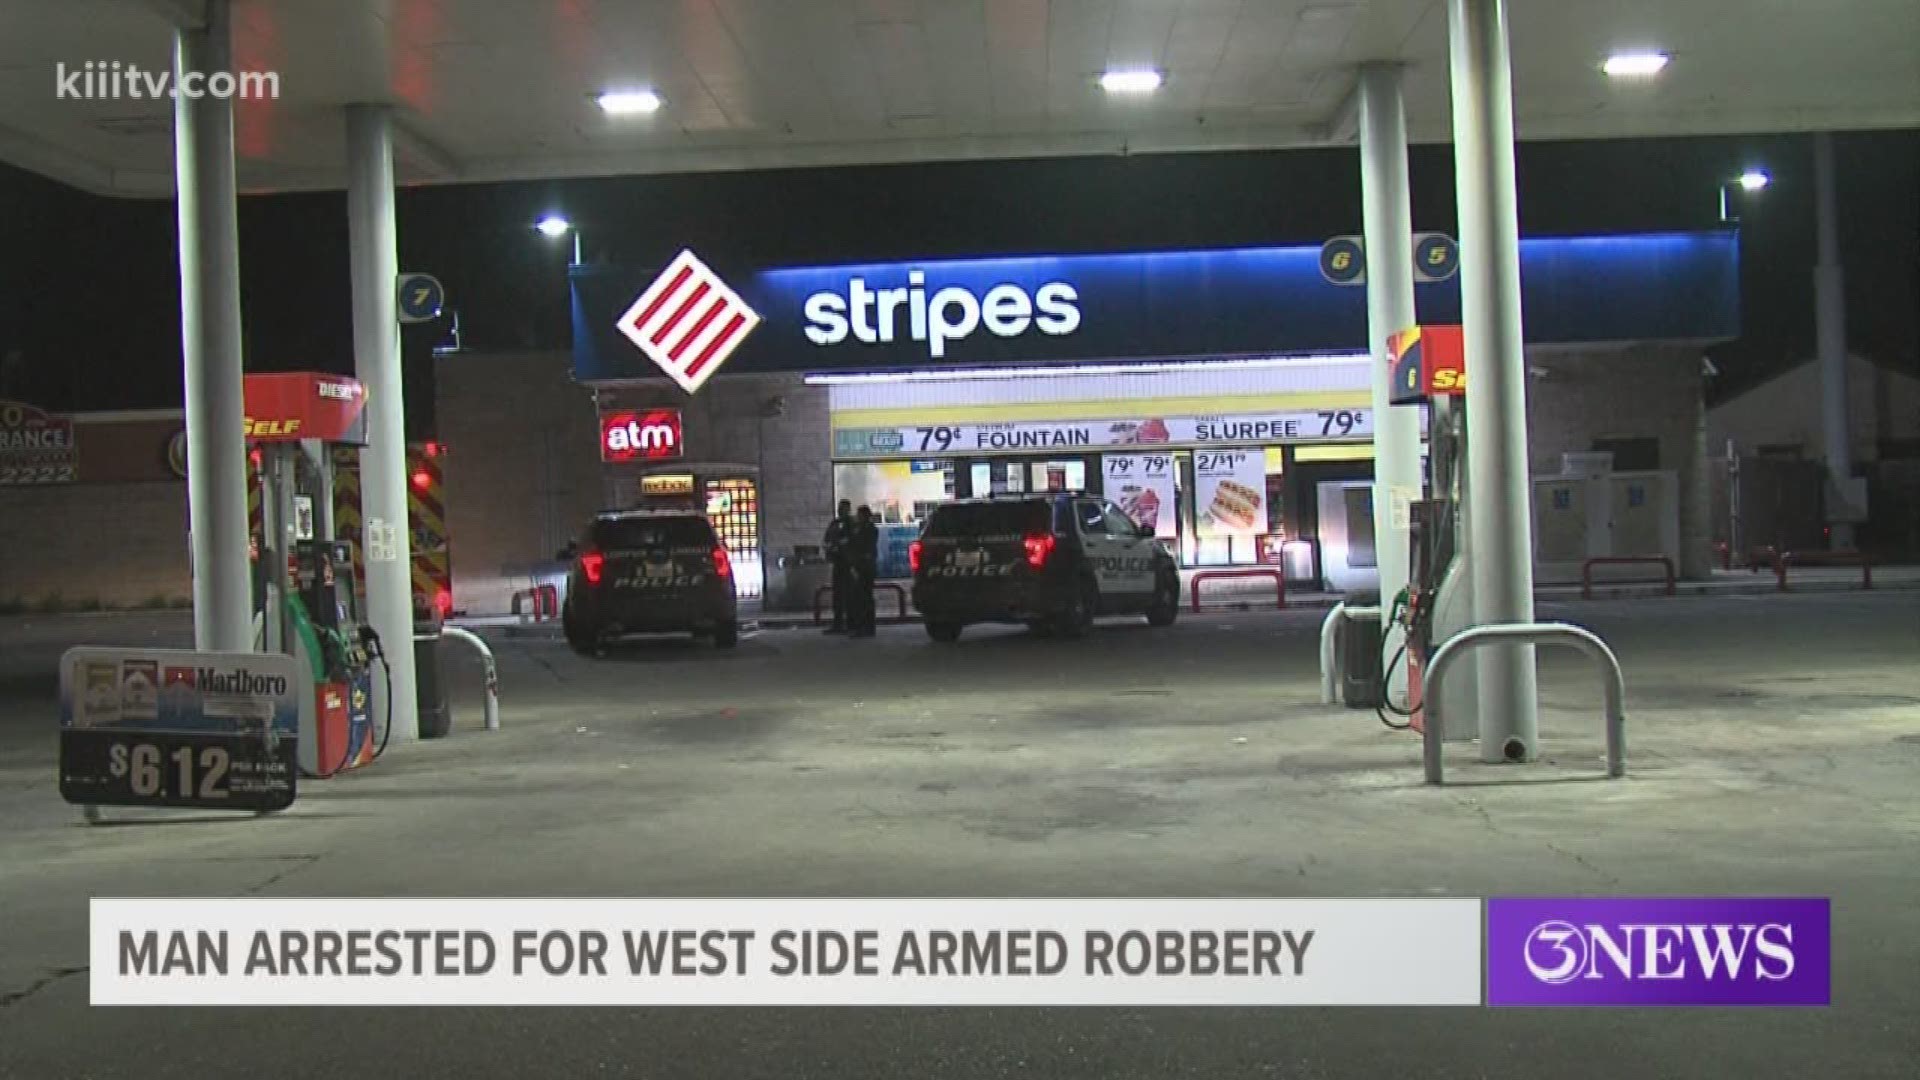 The Corpus Christi Police Department responded to an armed robbery Monday morning at the Stripes convenience store along Port and Tarlton.